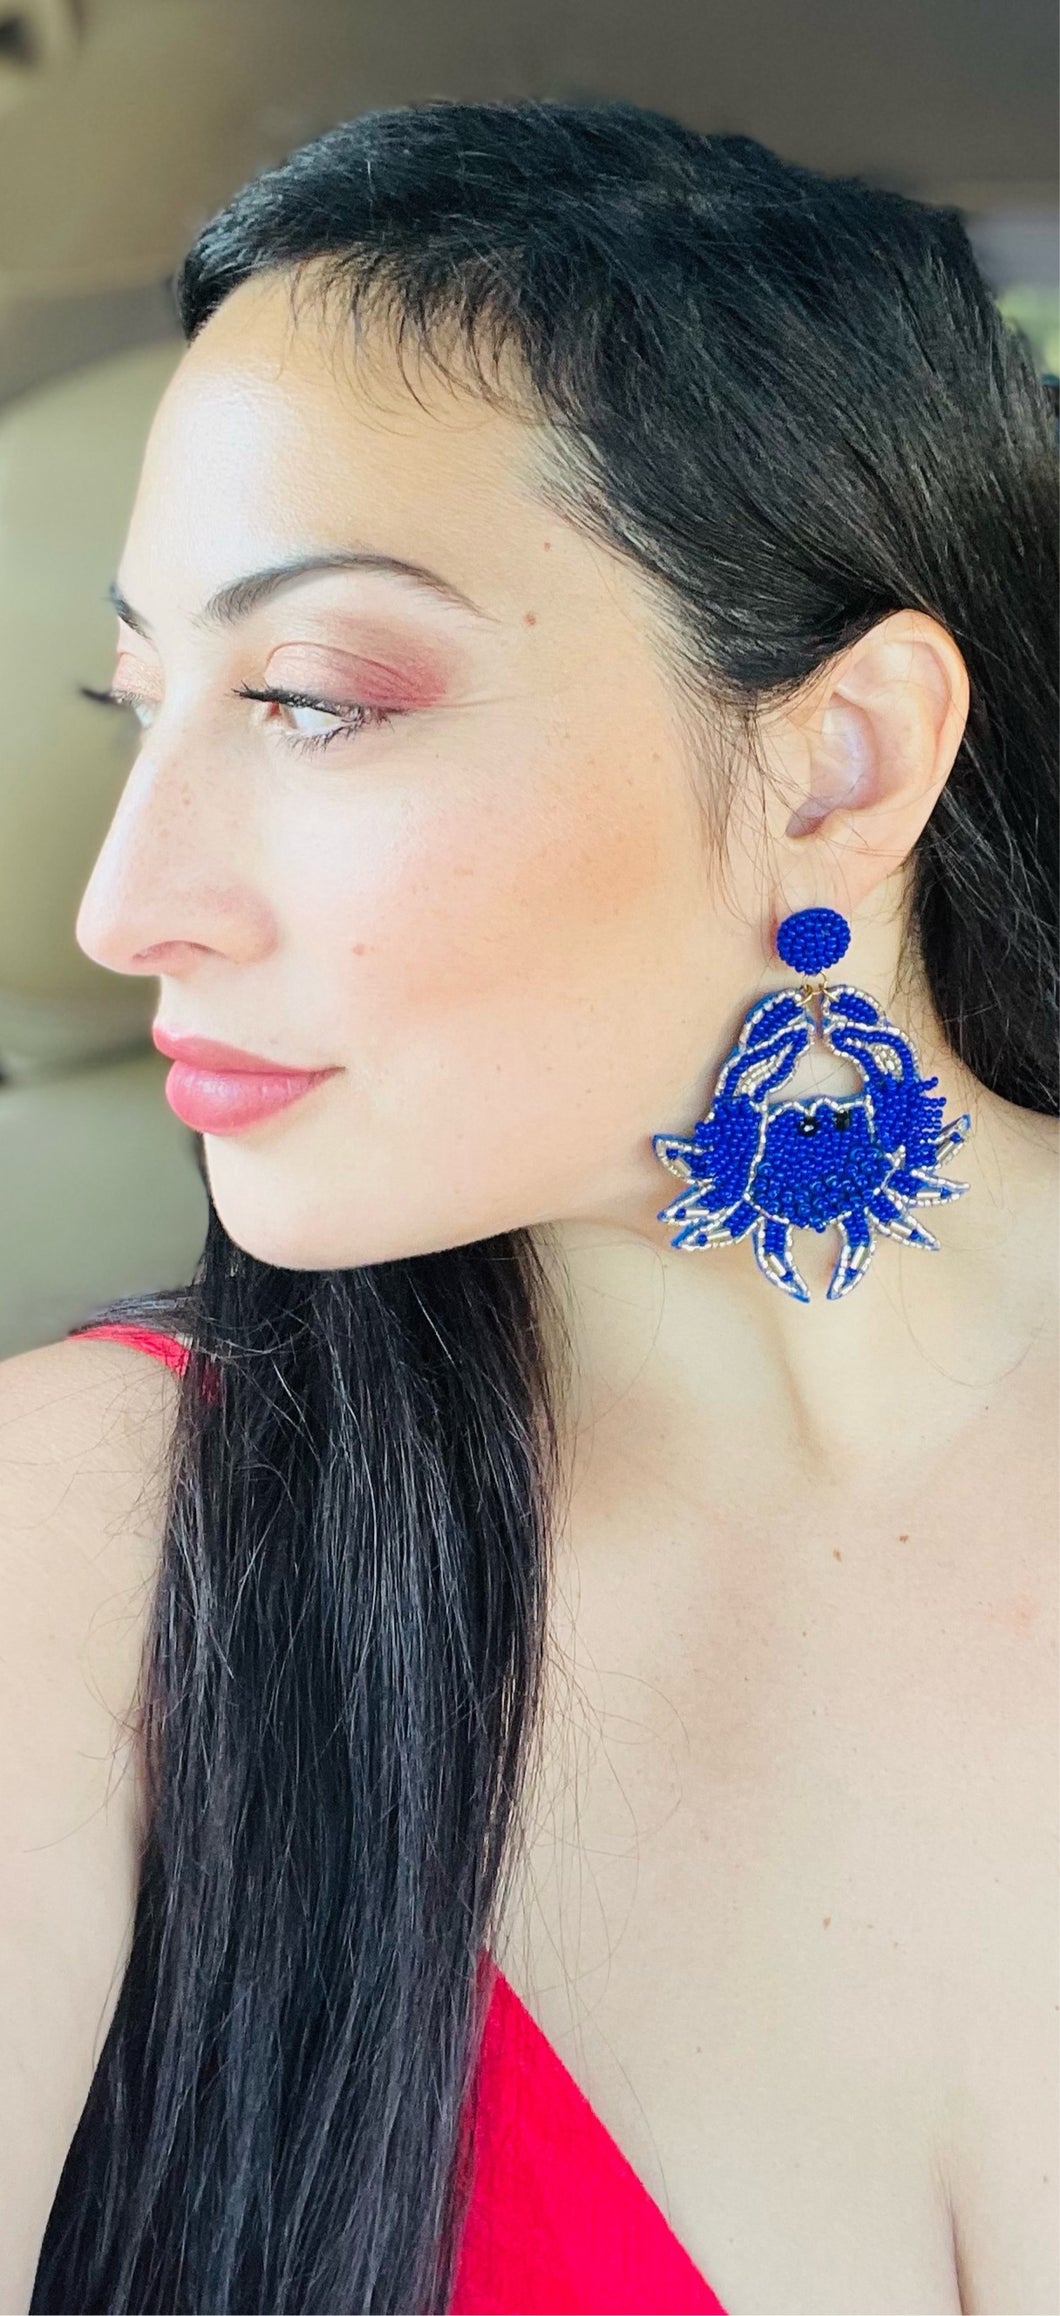 The Blue Crab Earring